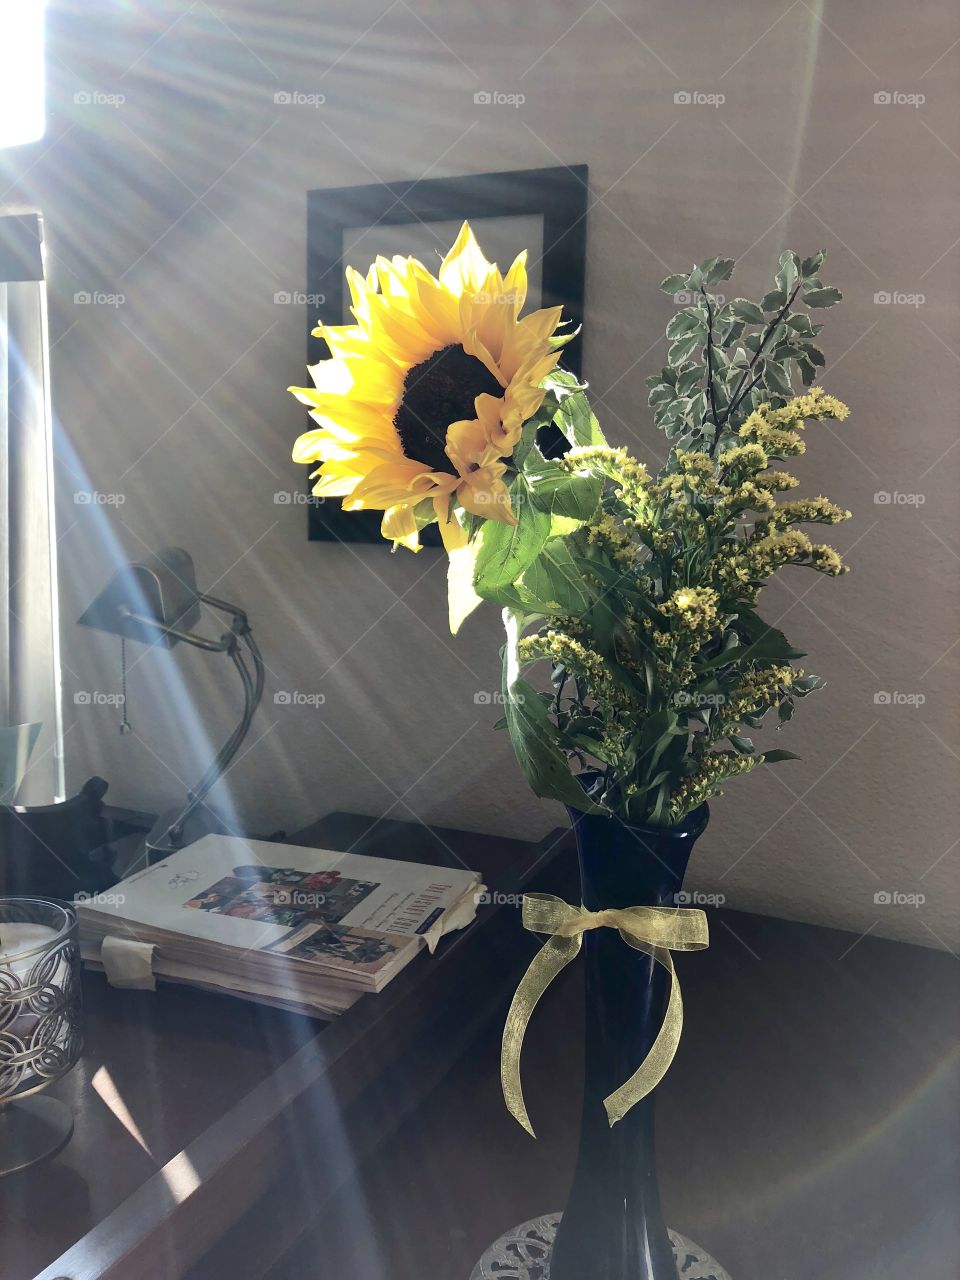 Sunflower bouquet on piano with sun rays coming in.